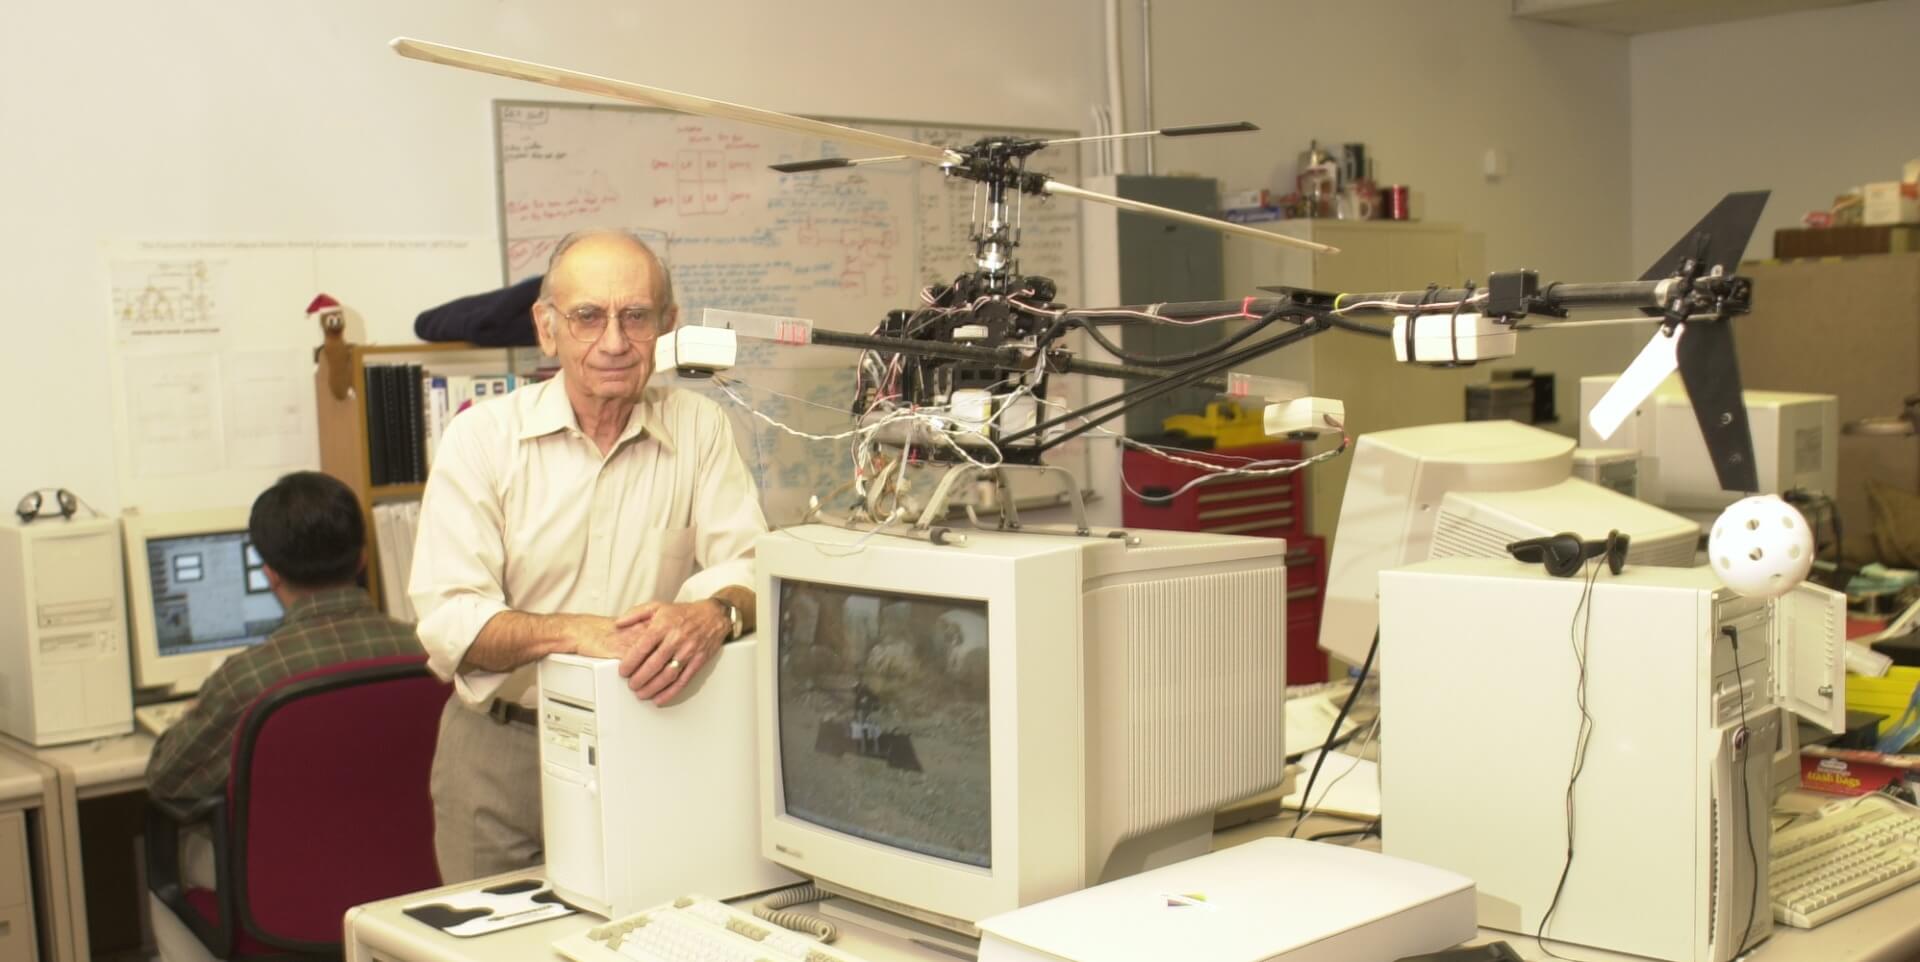 Bekey in his lab, approximately 1998, with a helicopter he built with his students. Some of the technology from this project went directly into the helicopter that recently flew on Mars (PHOTO CREDIT: Michelle Bekey)